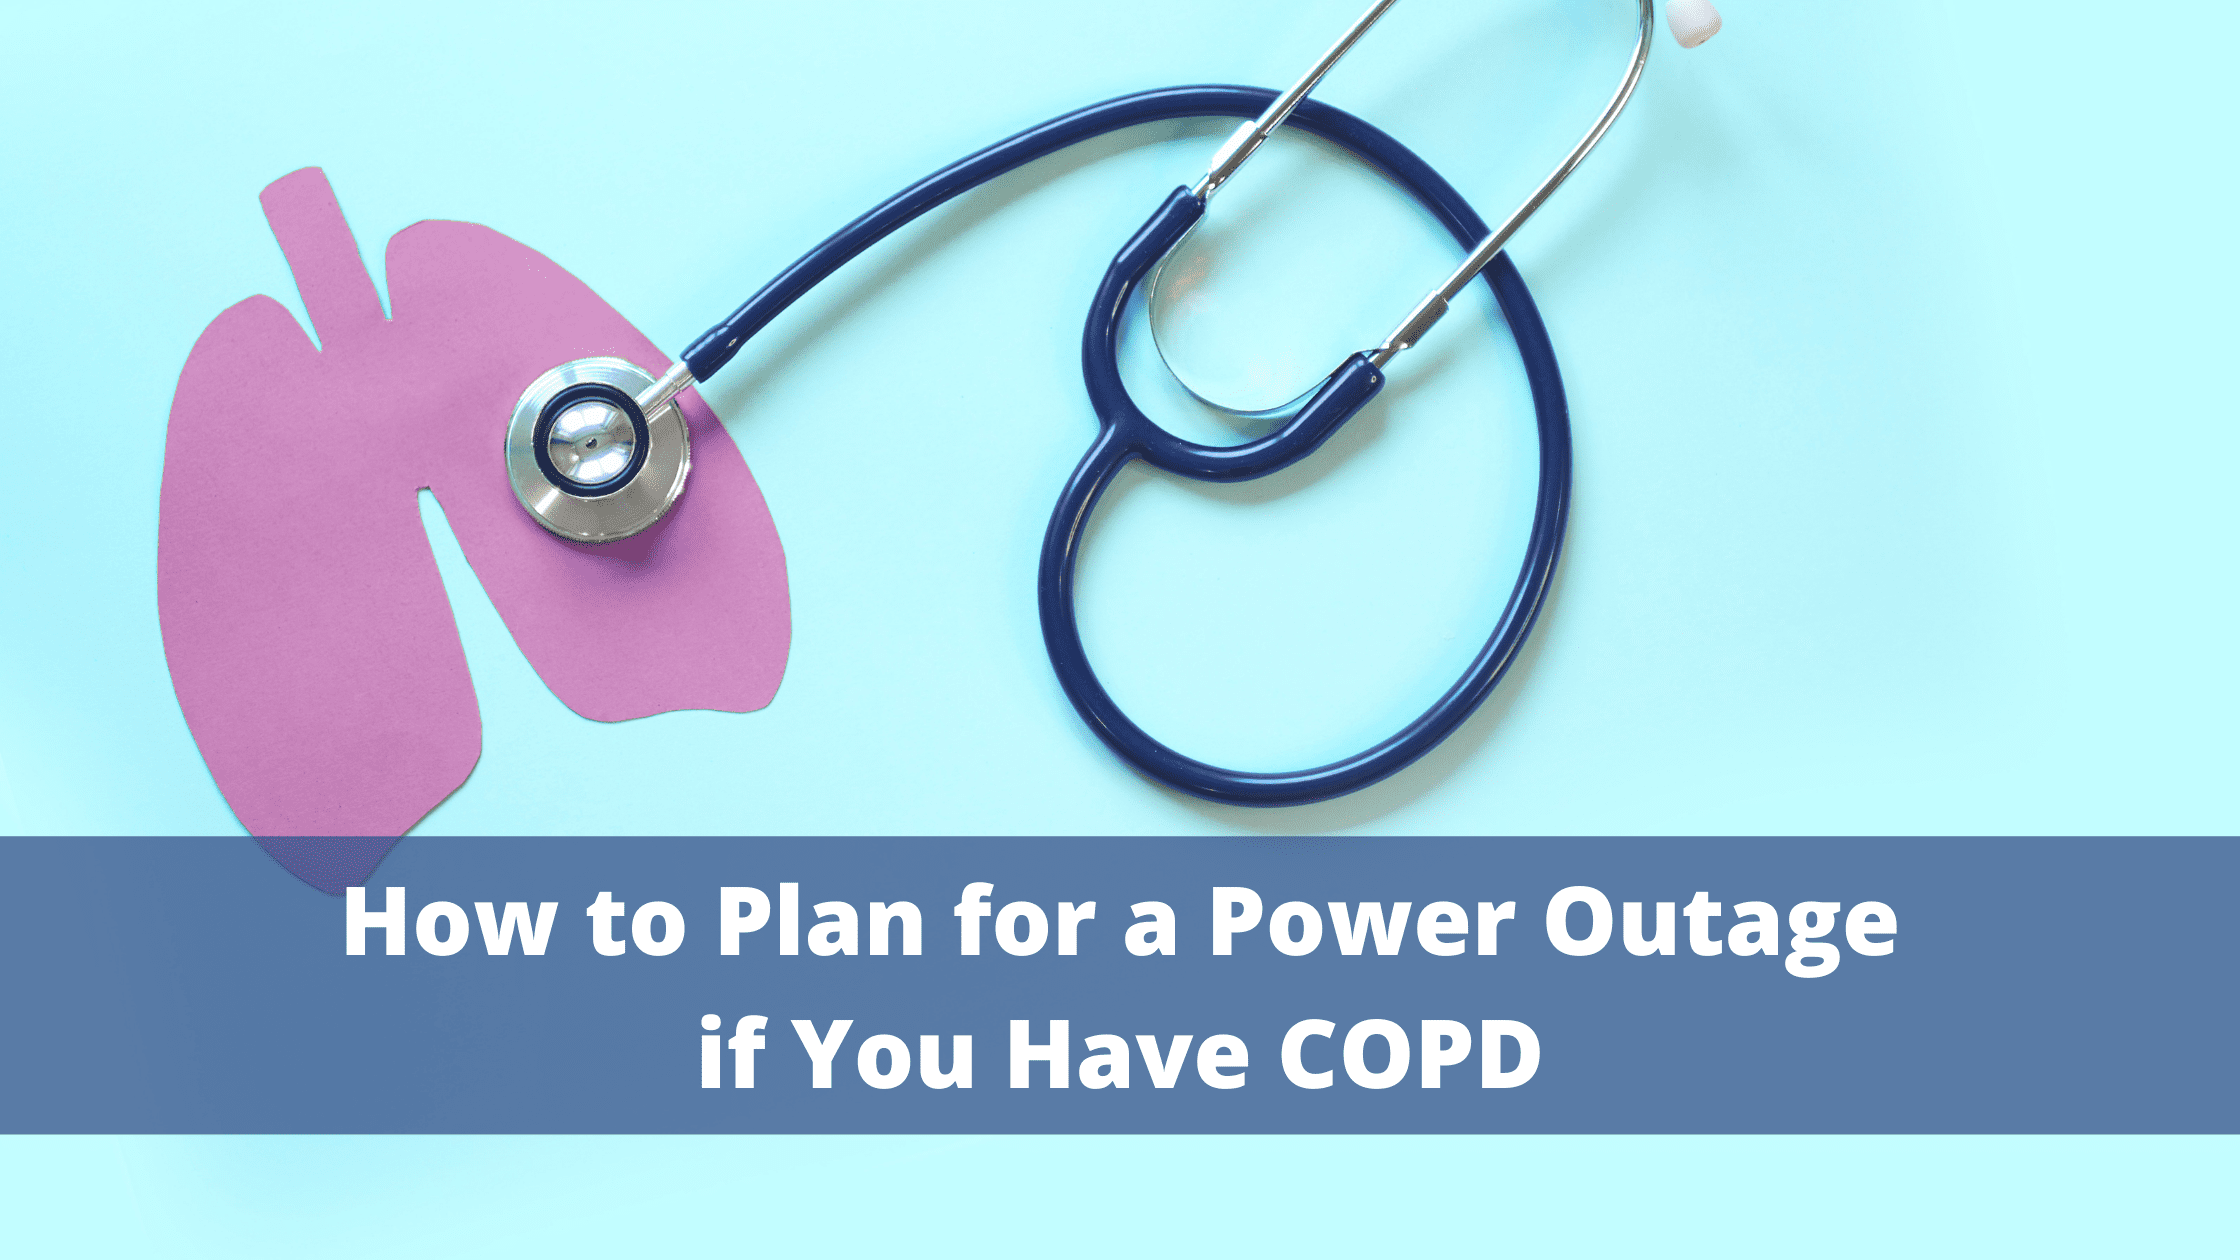 How to Plan for a Power Outage if You Have COPD